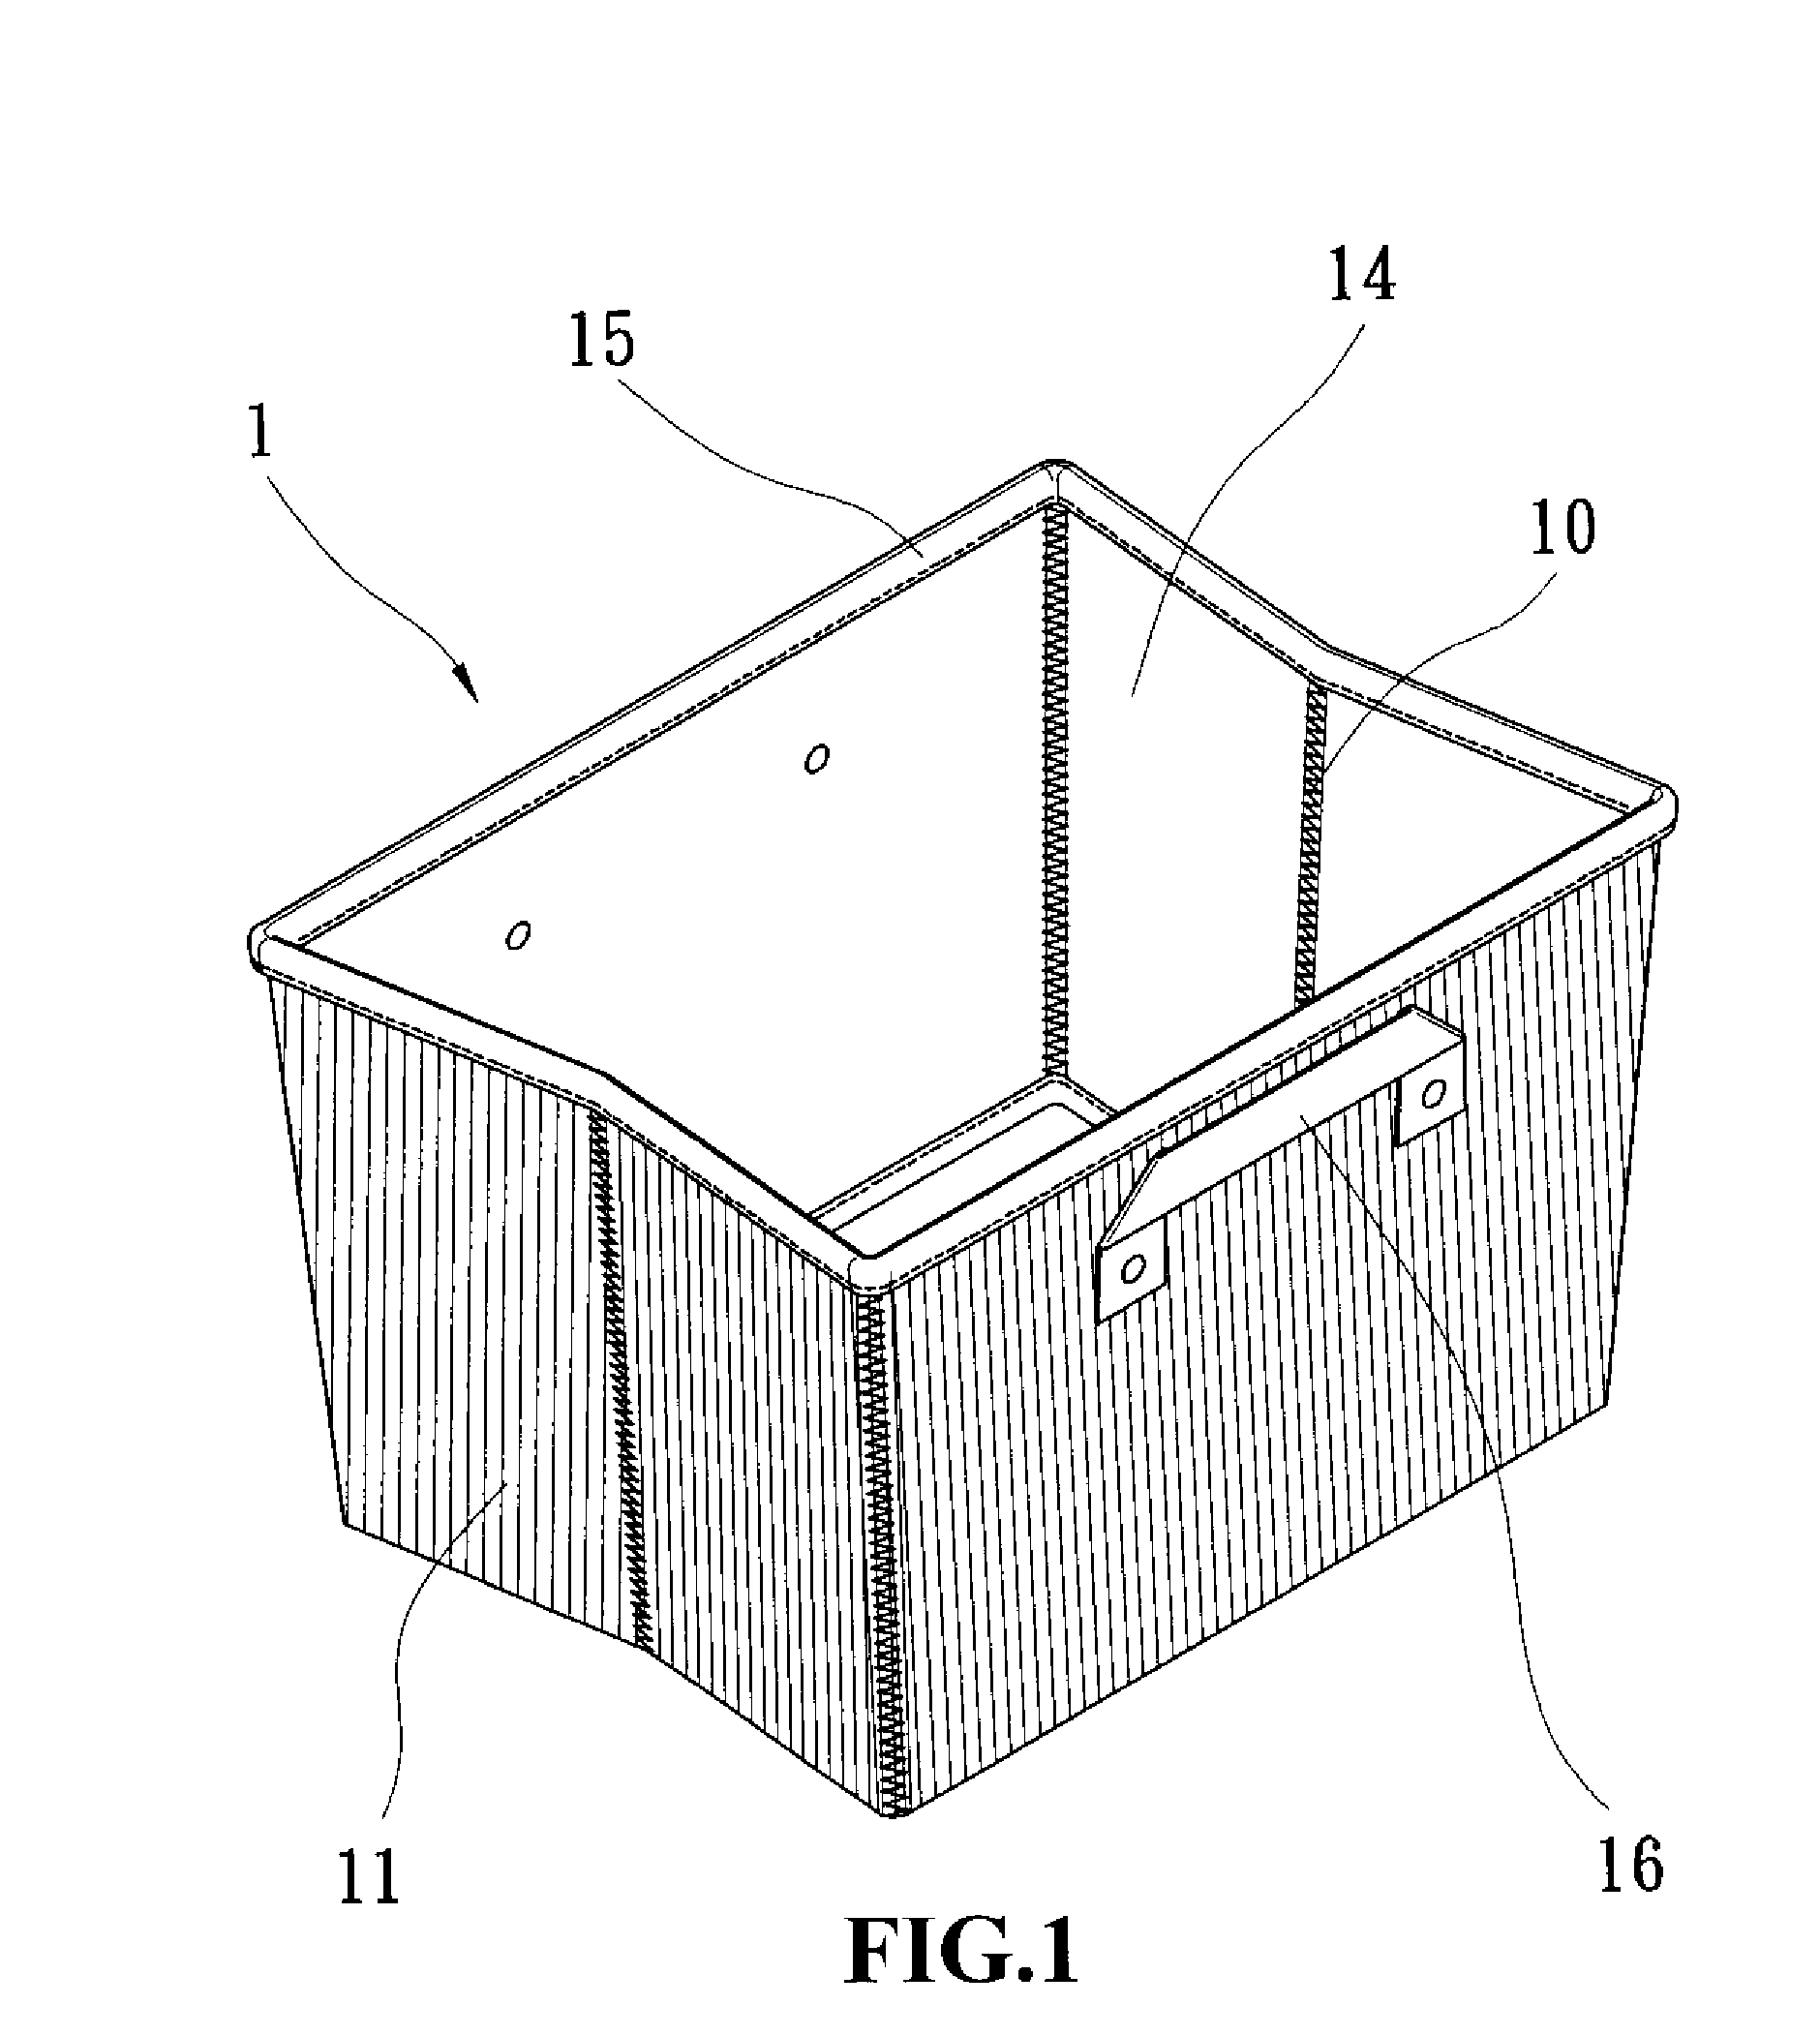 Structure of box